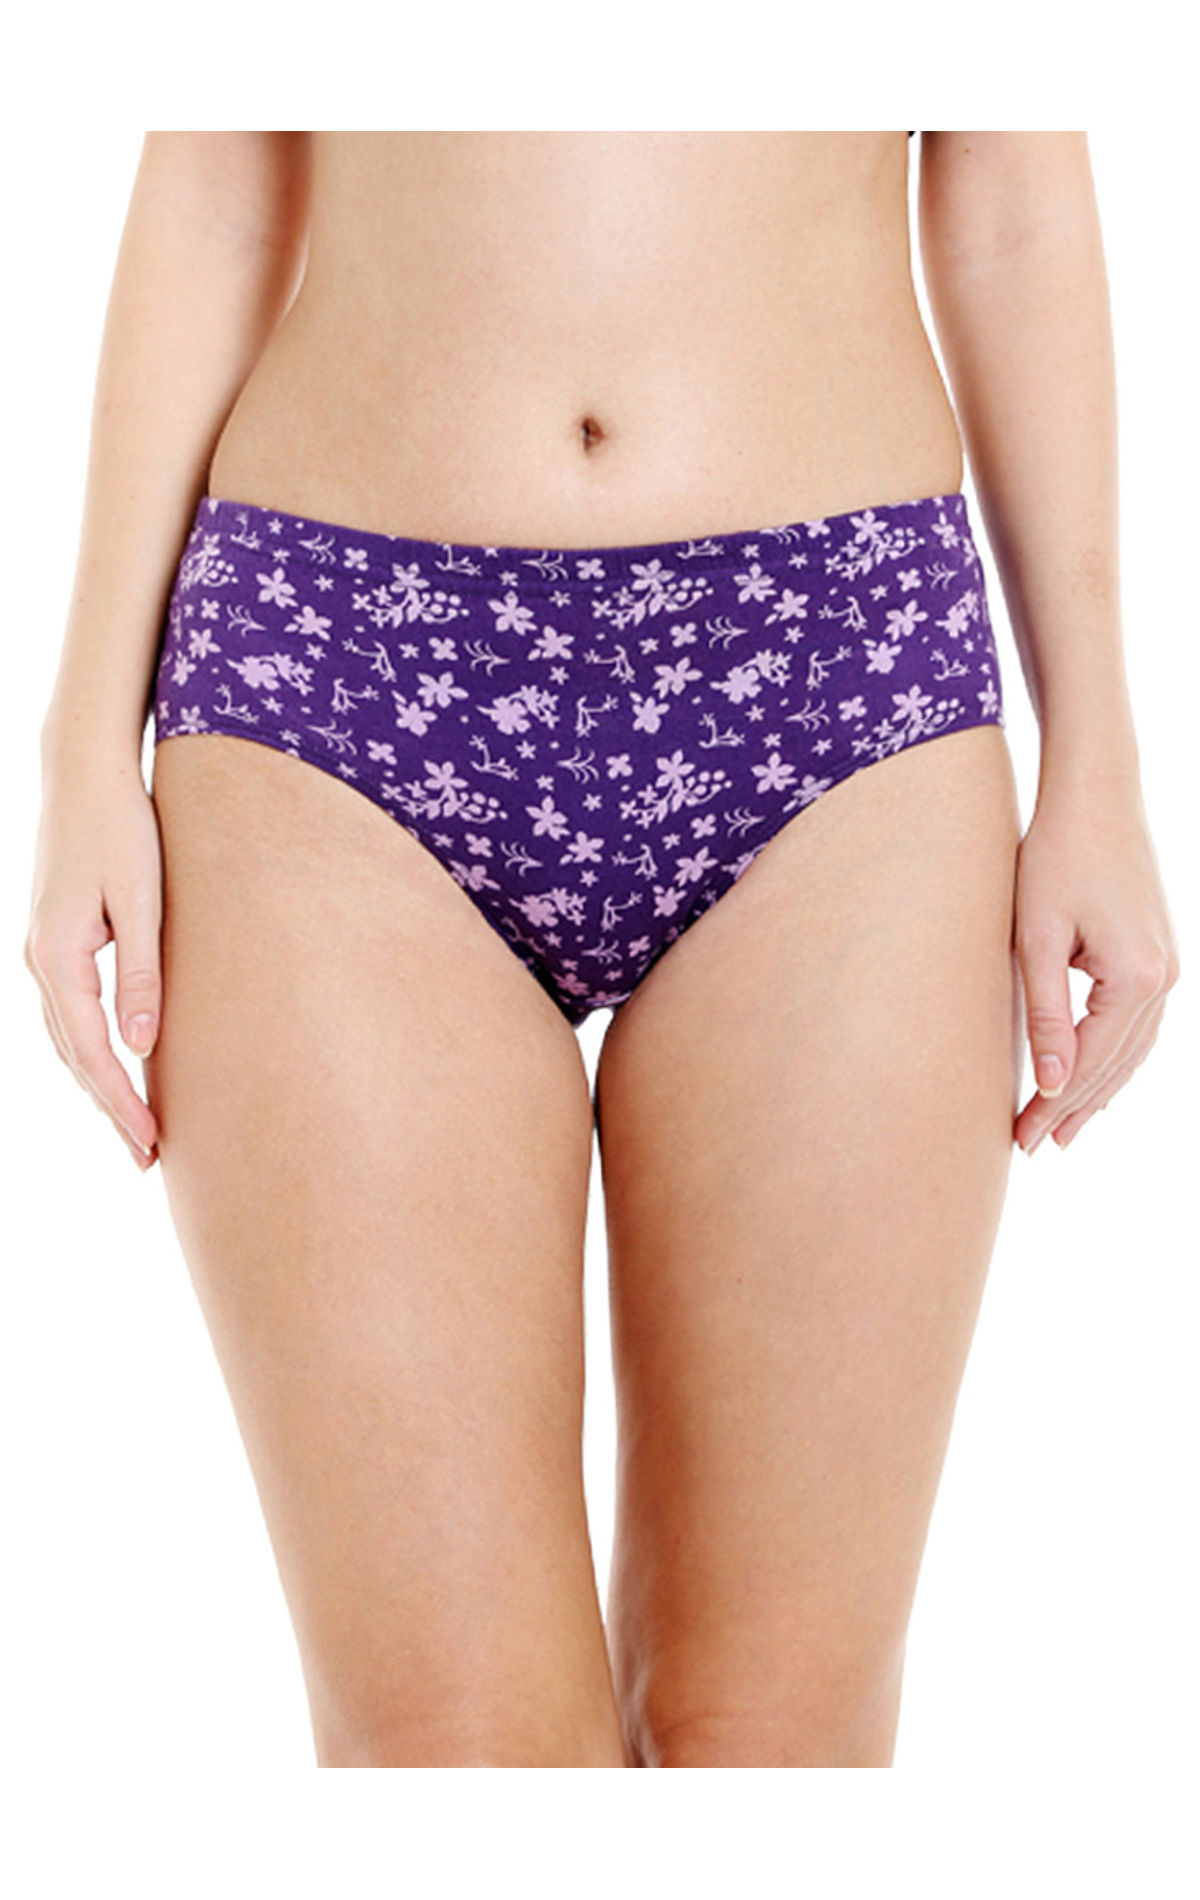 PBJCKAH Bamboo Underwear Women Briefs Watercolor Floral Purple Flowers  Breathable Ladies Hipster Panties XS at  Women's Clothing store